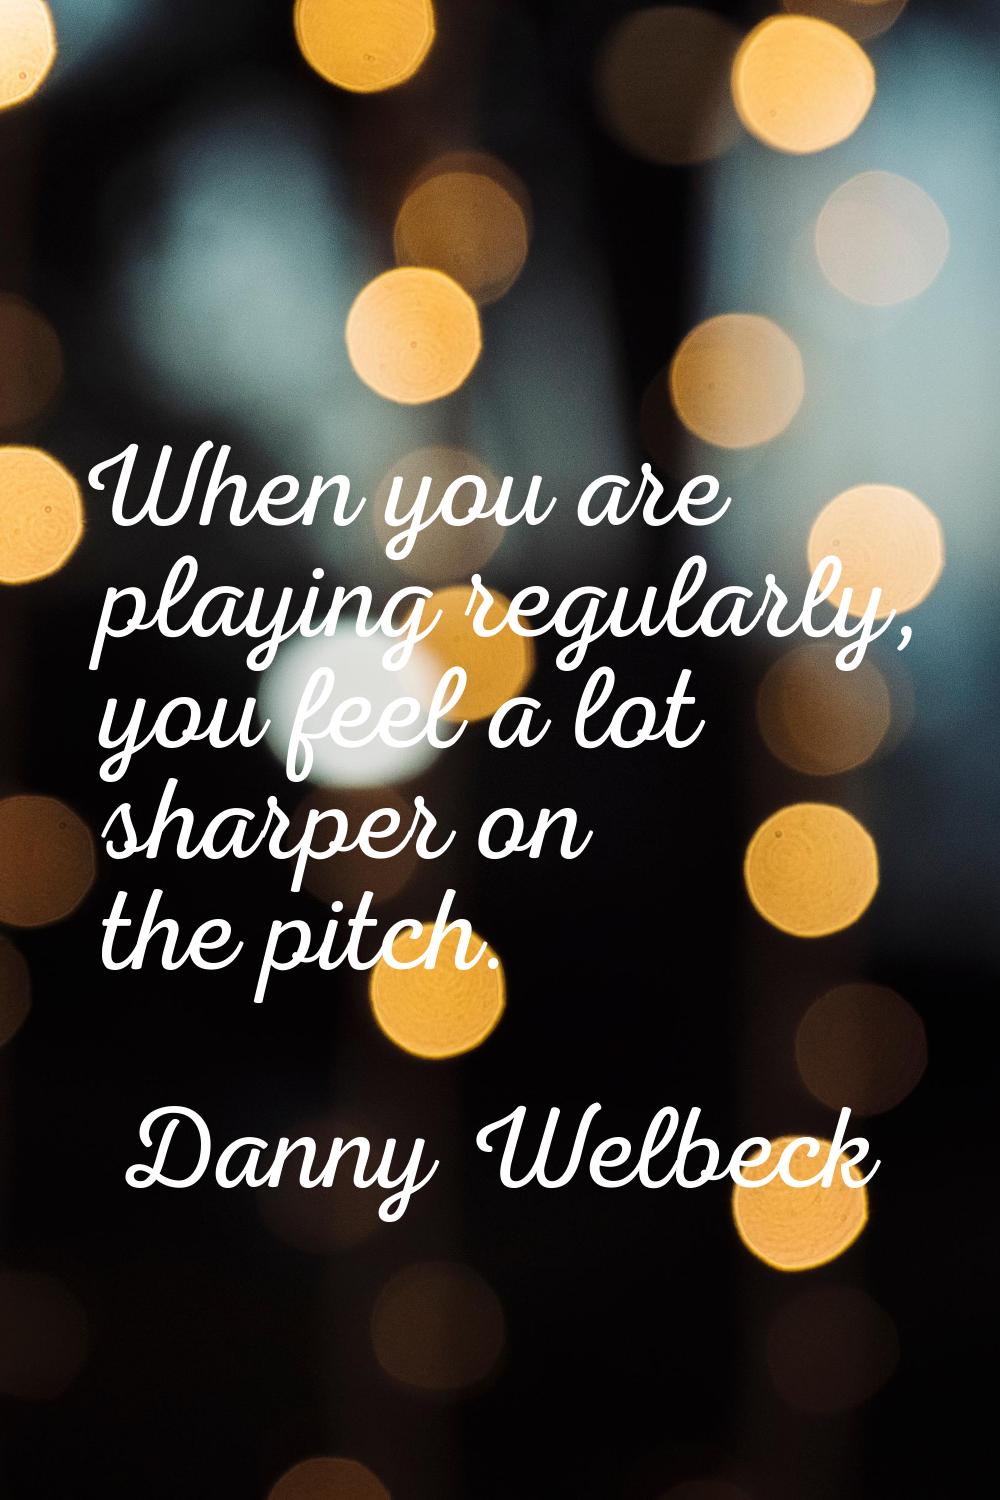 When you are playing regularly, you feel a lot sharper on the pitch.